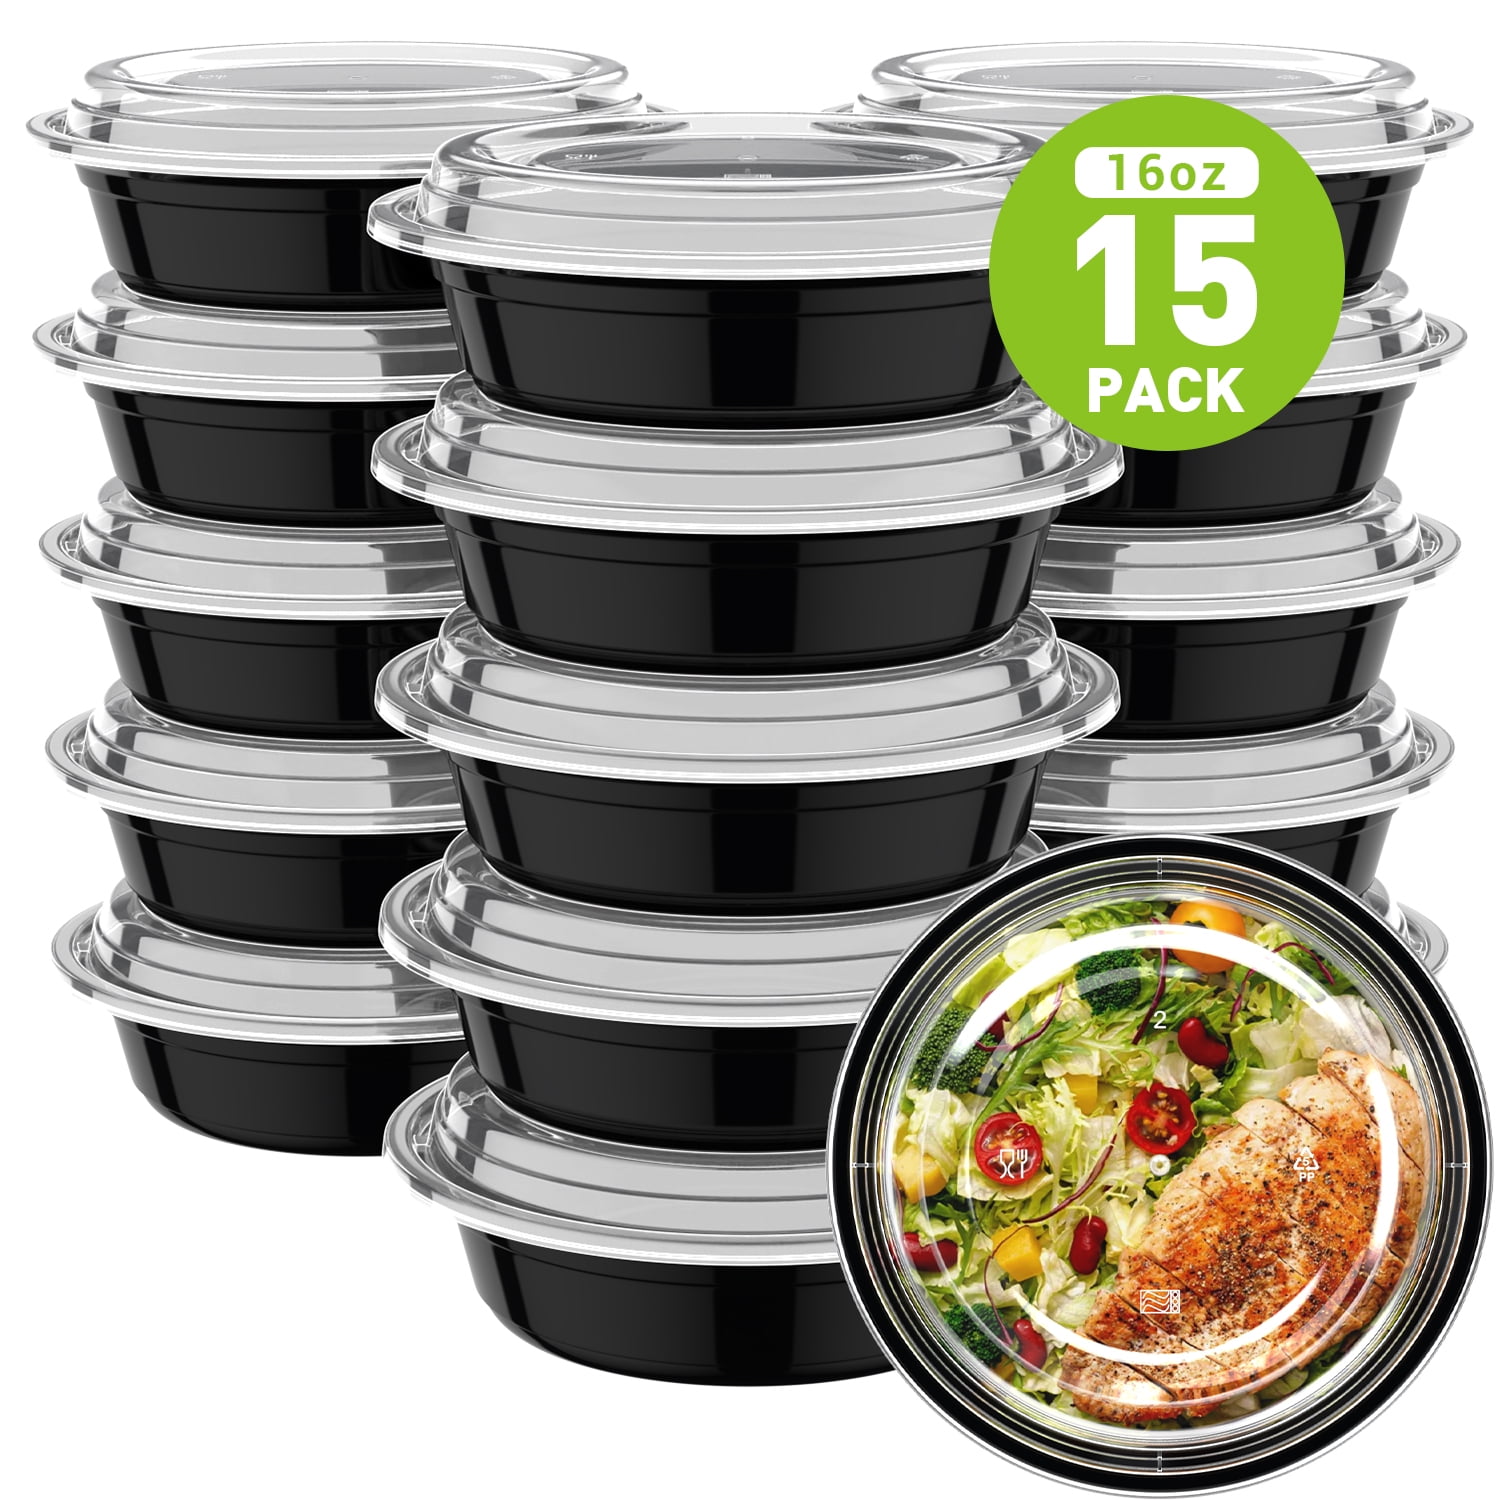  KOMUEE 10 Packs 22 oz Glass Meal Prep Containers with Lids,  Airtight Glass Lunch Containers, BPA Free, Microwave, Oven, Freezer and  Dishwasher Friendly, Gray: Home & Kitchen